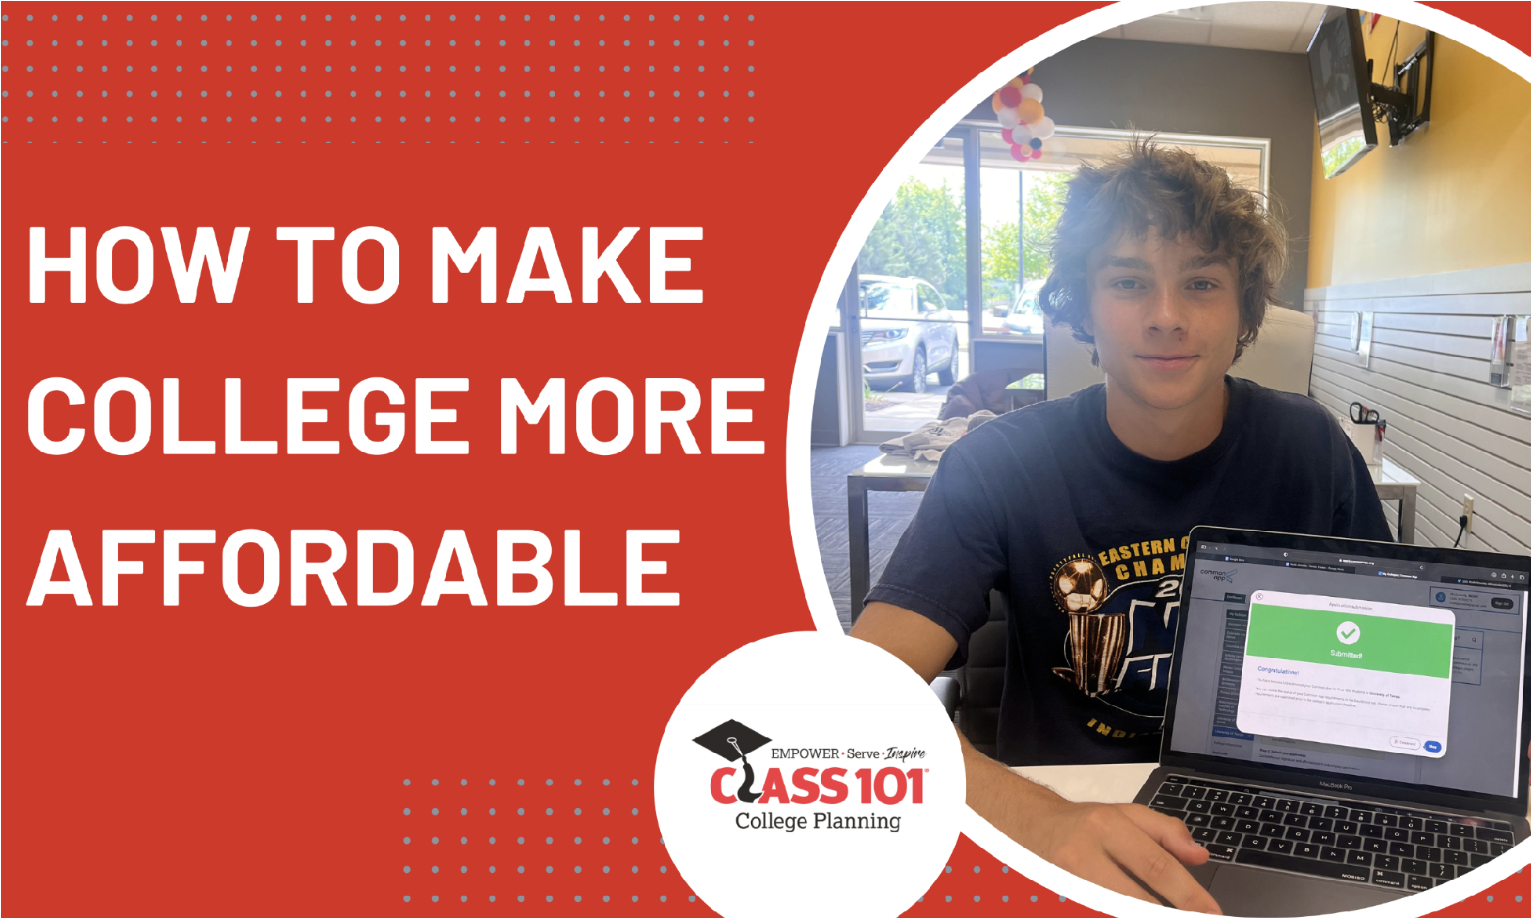 How to Make College More Affordable